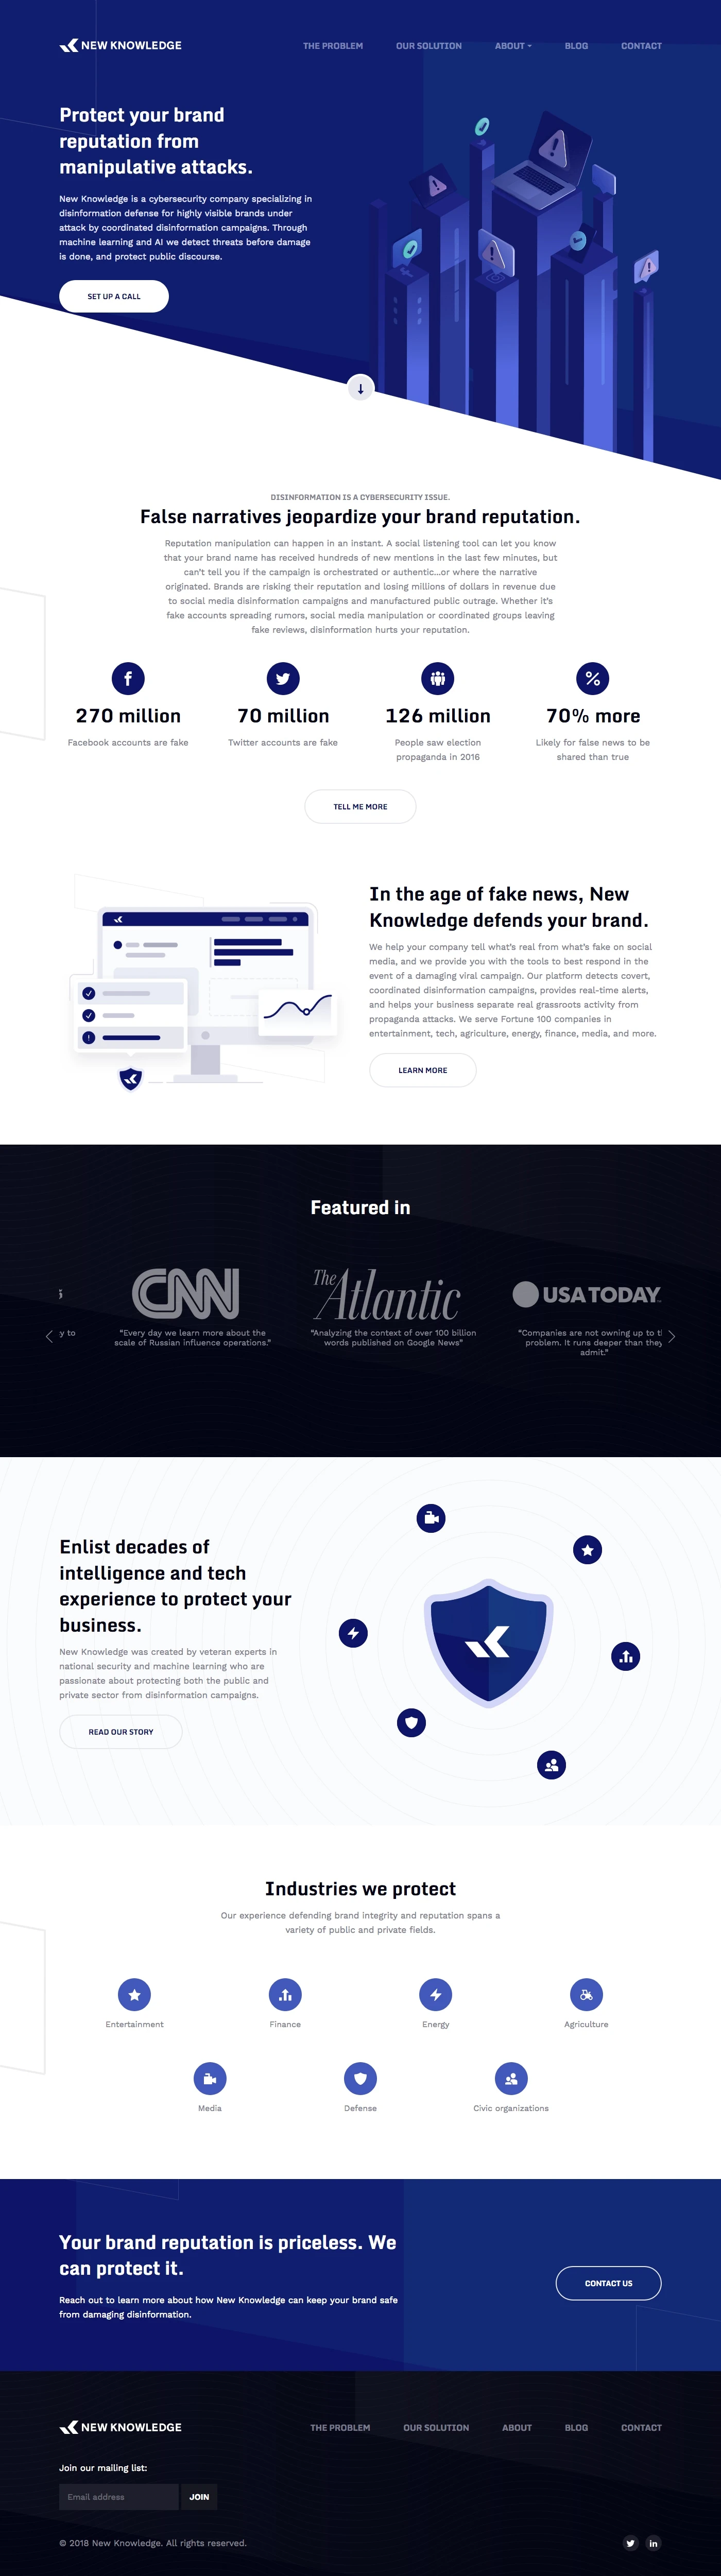 New Knowledge Landing Page Example: New Knowledge is a cybersecurity company specializing in disinformation defense for highly visible brands under attack by coordinated disinformation campaigns. Through machine learning and AI we detect threats before damage is done, and protect public discourse.